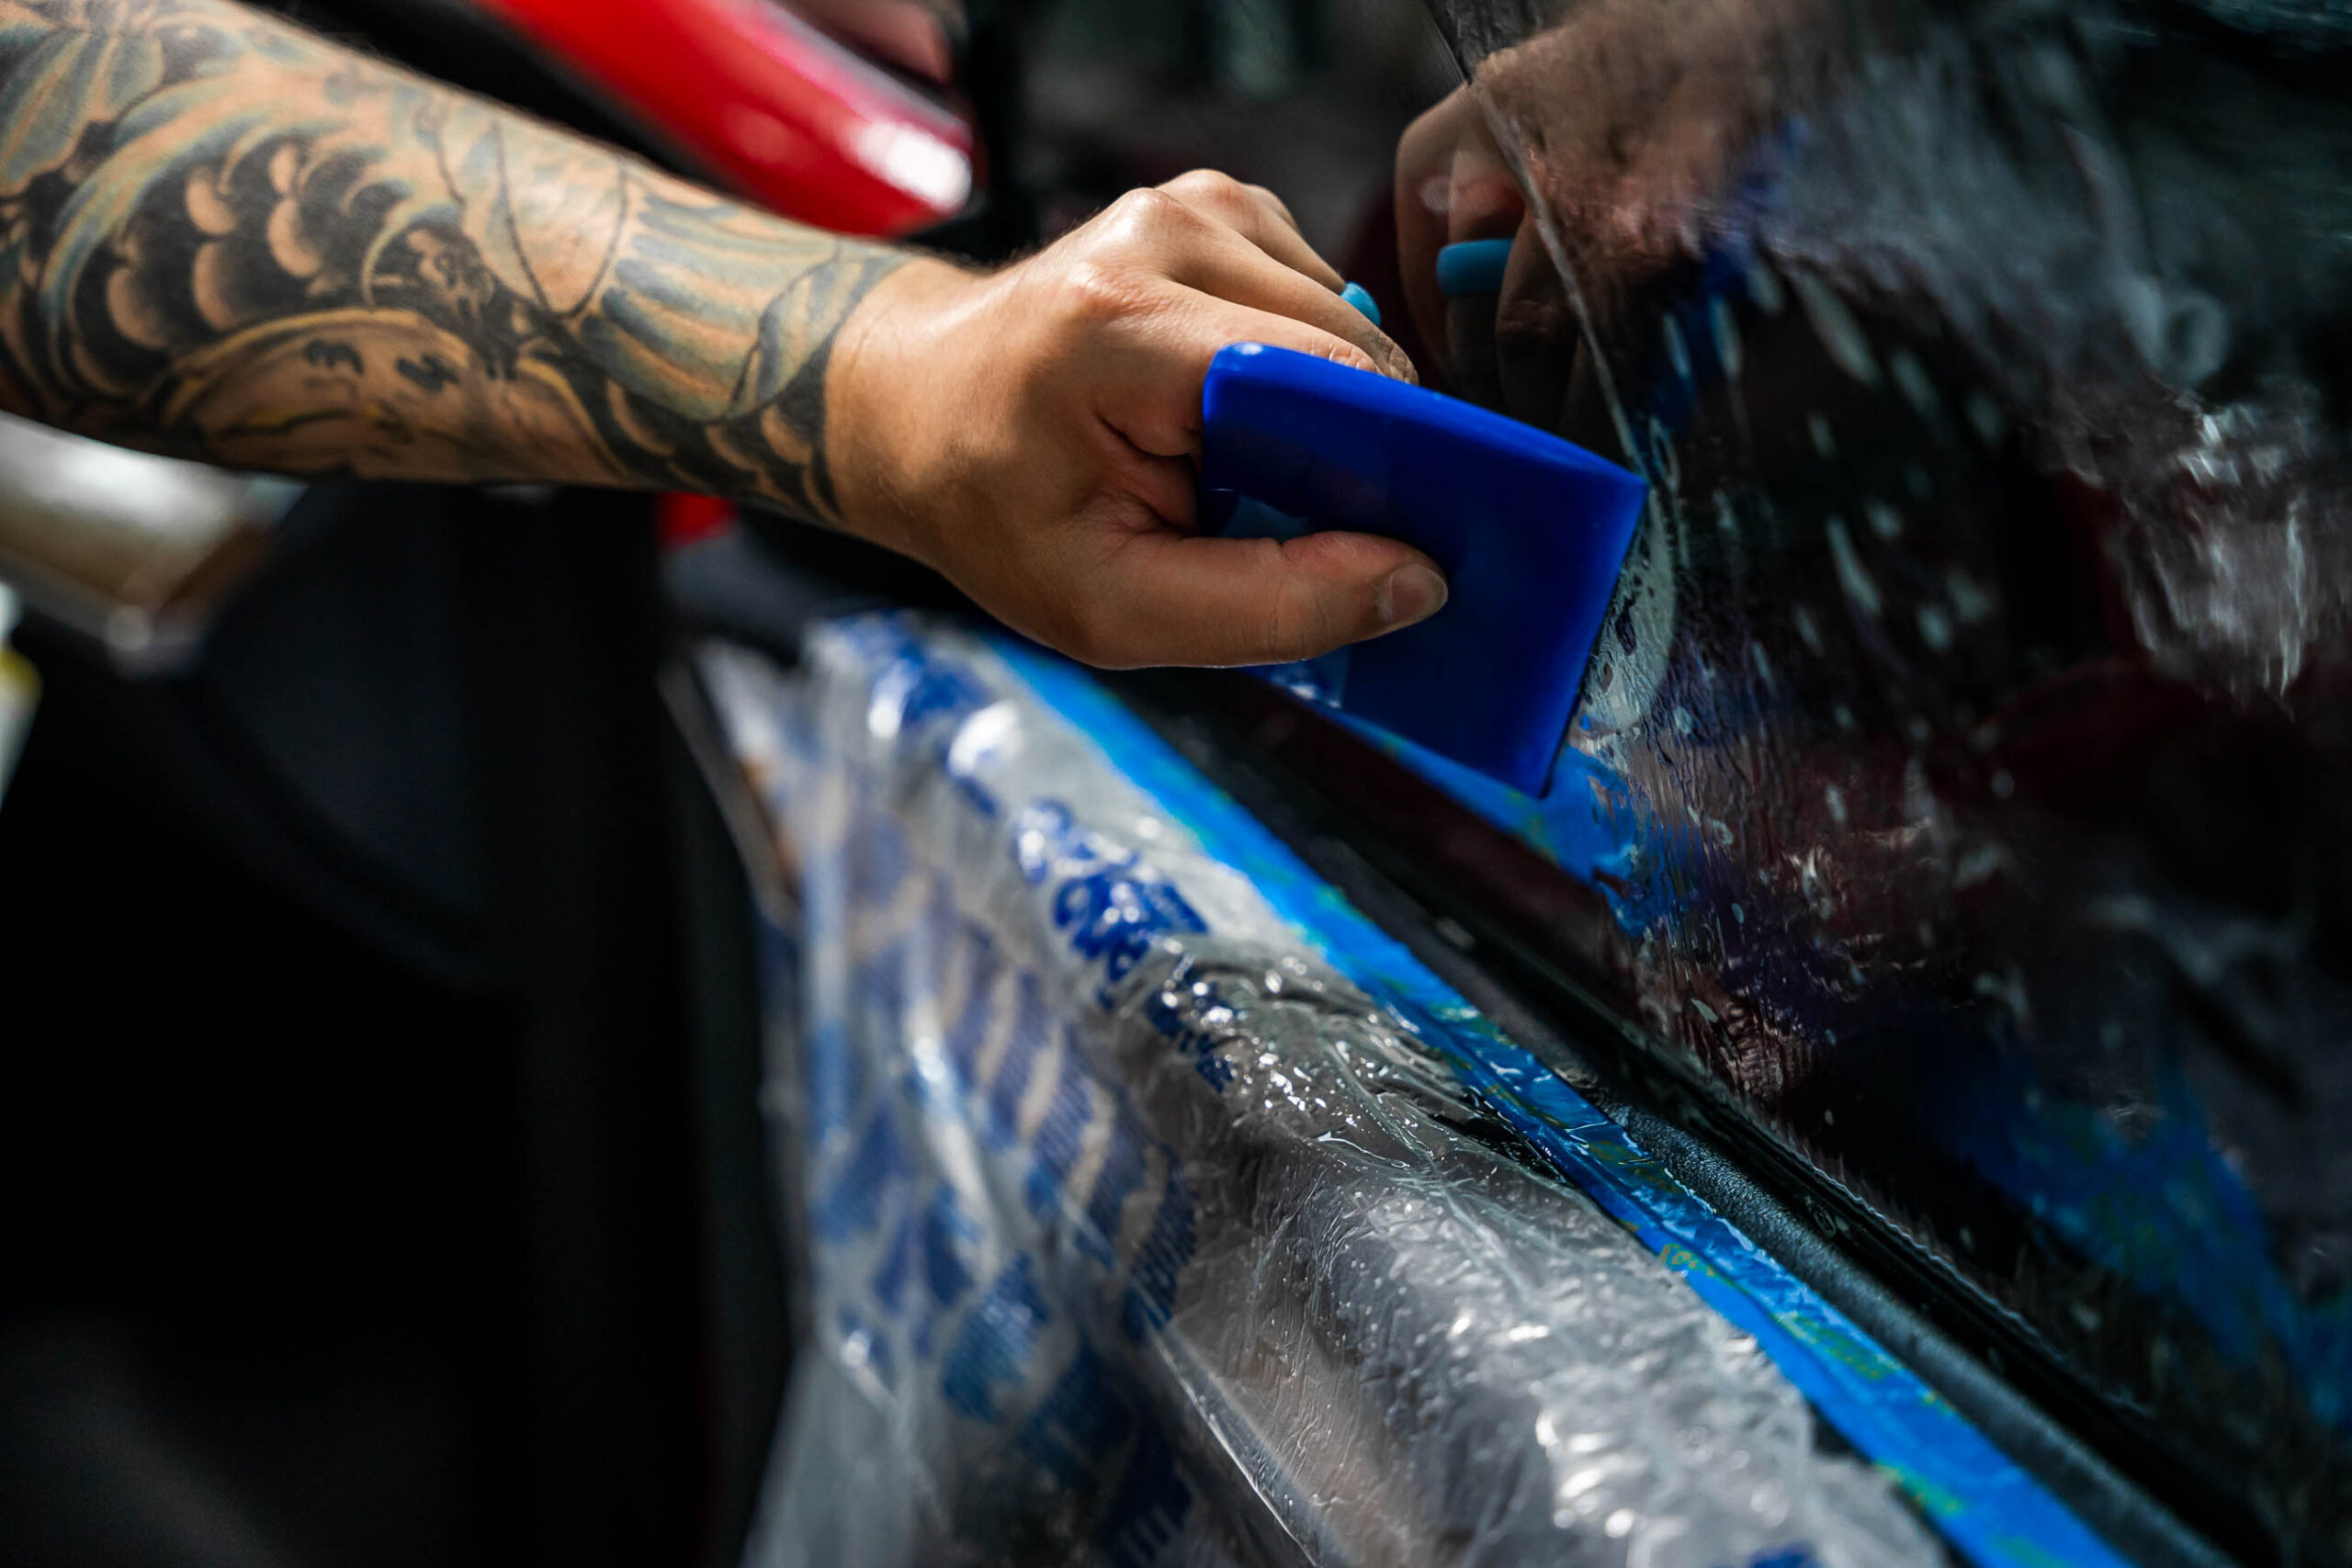 Installing tint with a squeegee up close